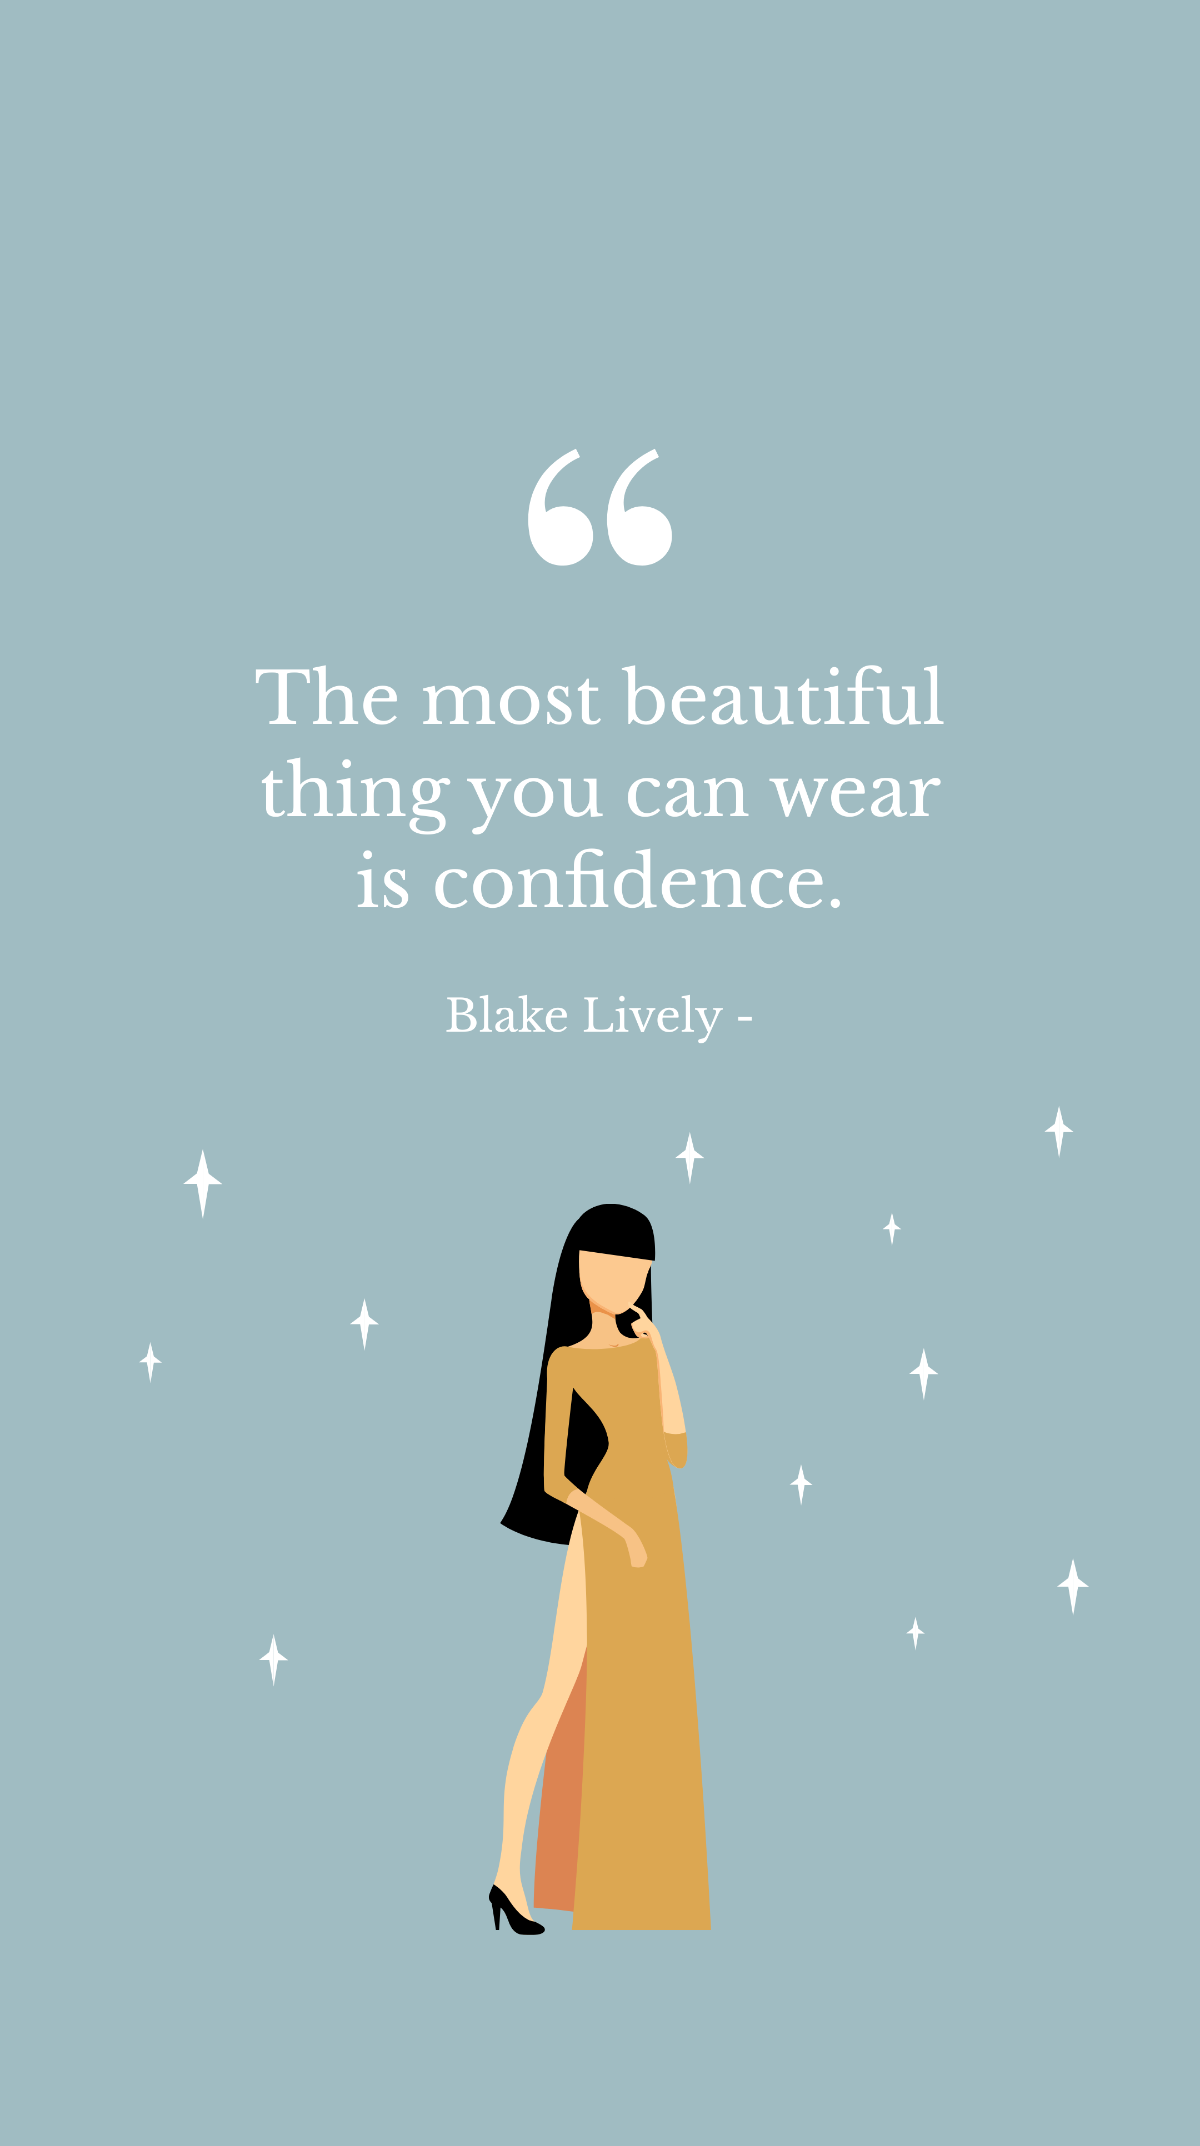 Free Blake Lively - The most beautiful thing you can wear is confidence. Template